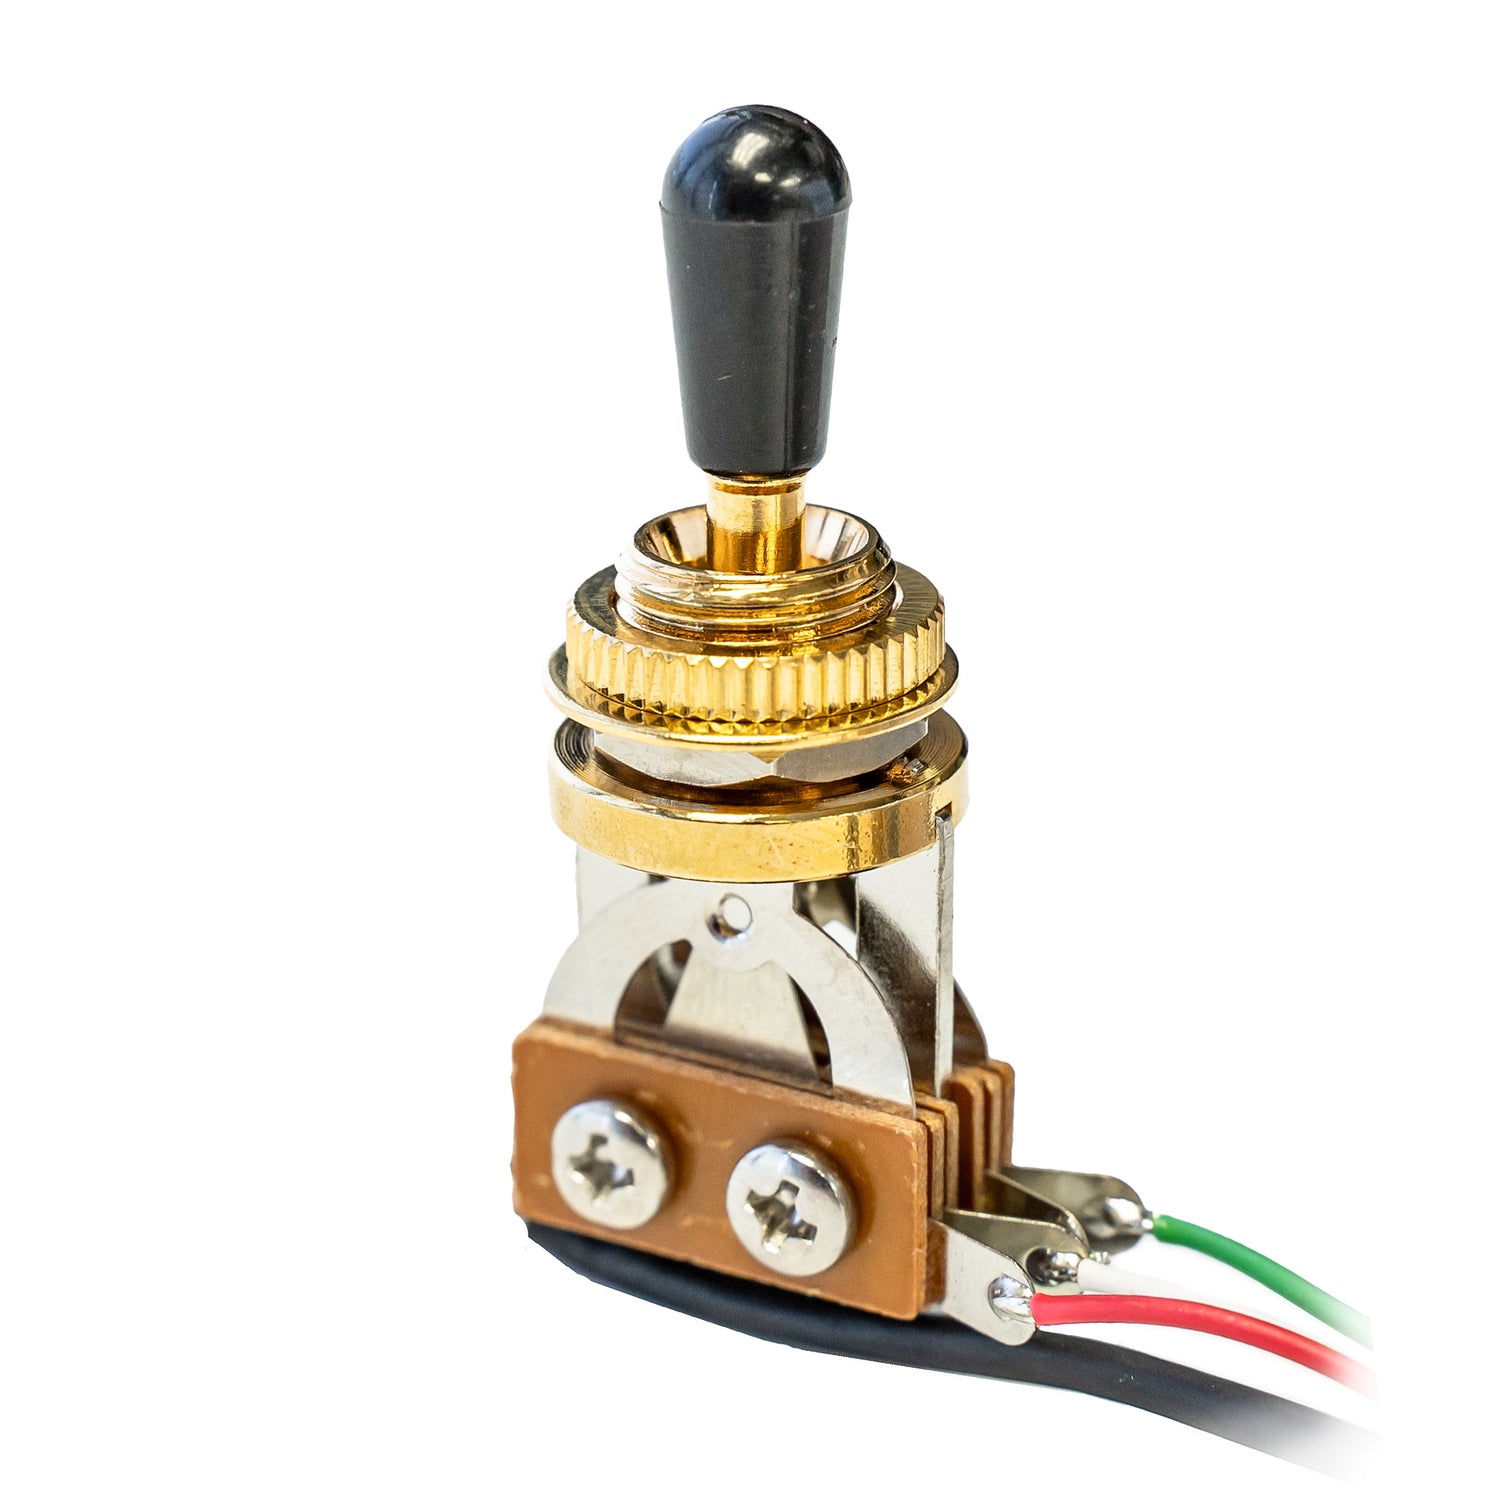 Prewired 3 way gold toggle switch with a black tip for Les Paul or other two pickup guitar